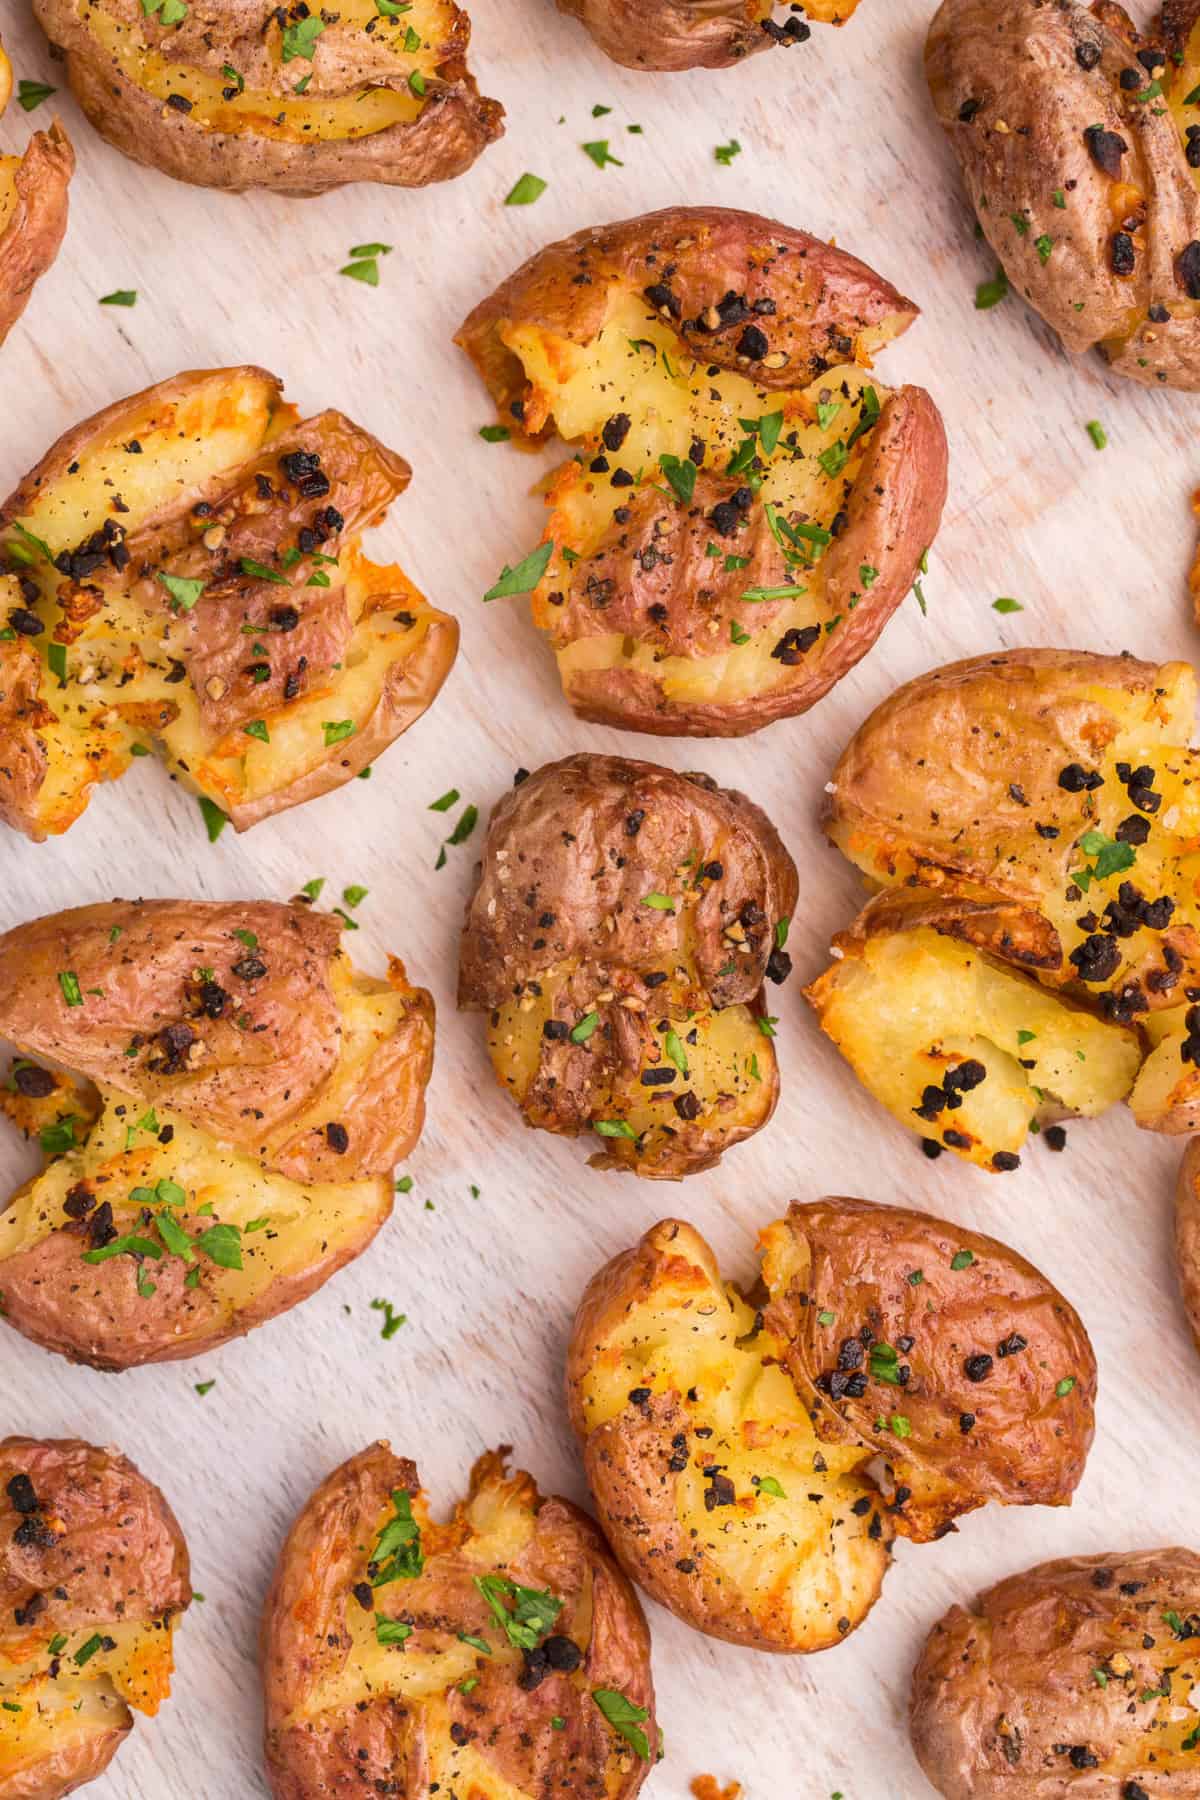 Air Fryer Smashed Potatoes - Savory Thoughts